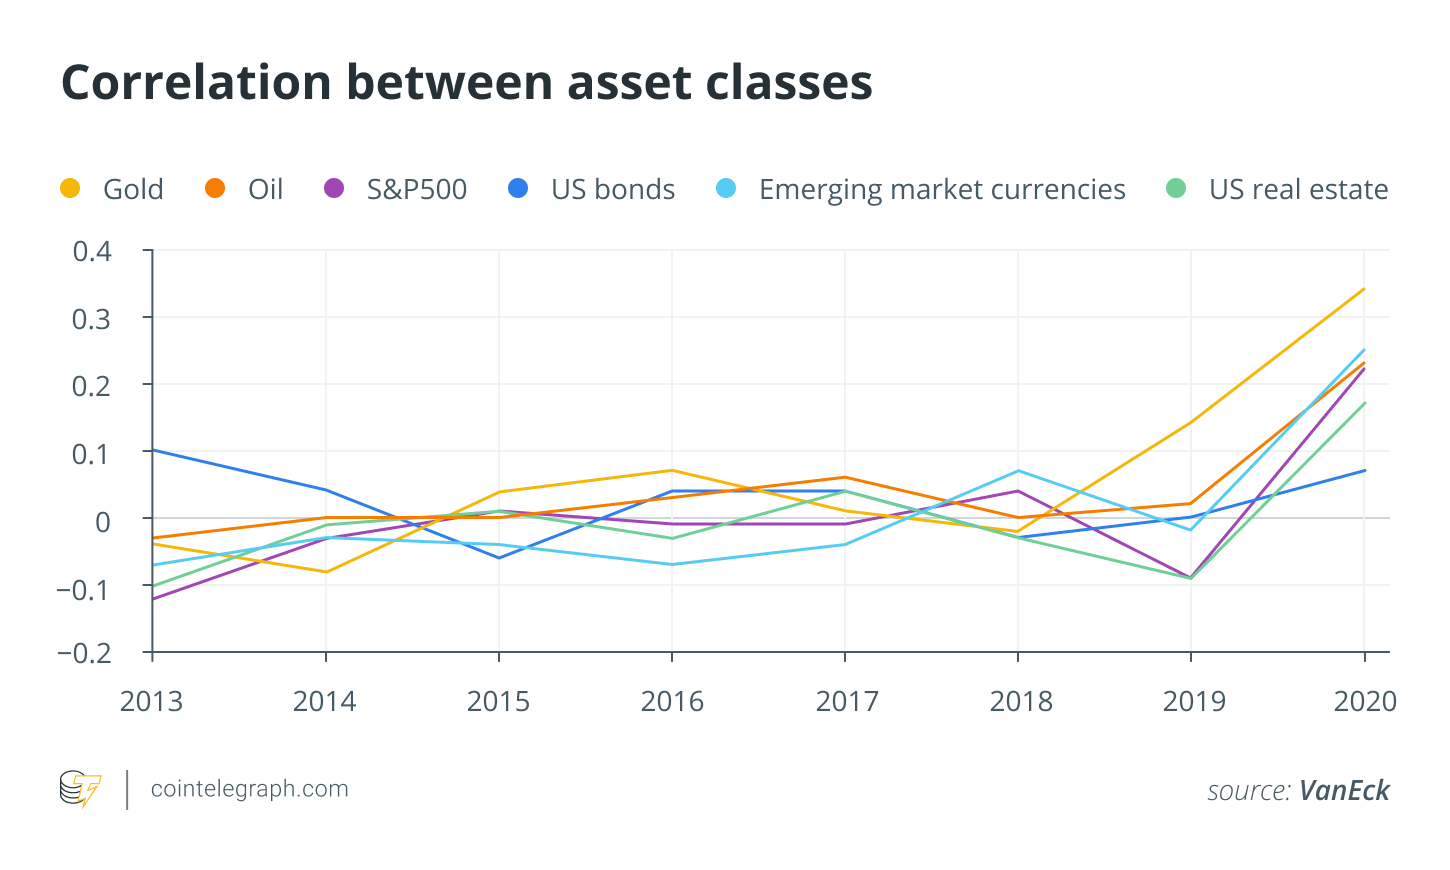 Joining the ranks: Bitcoin’s correlation with gold and stocks is growing